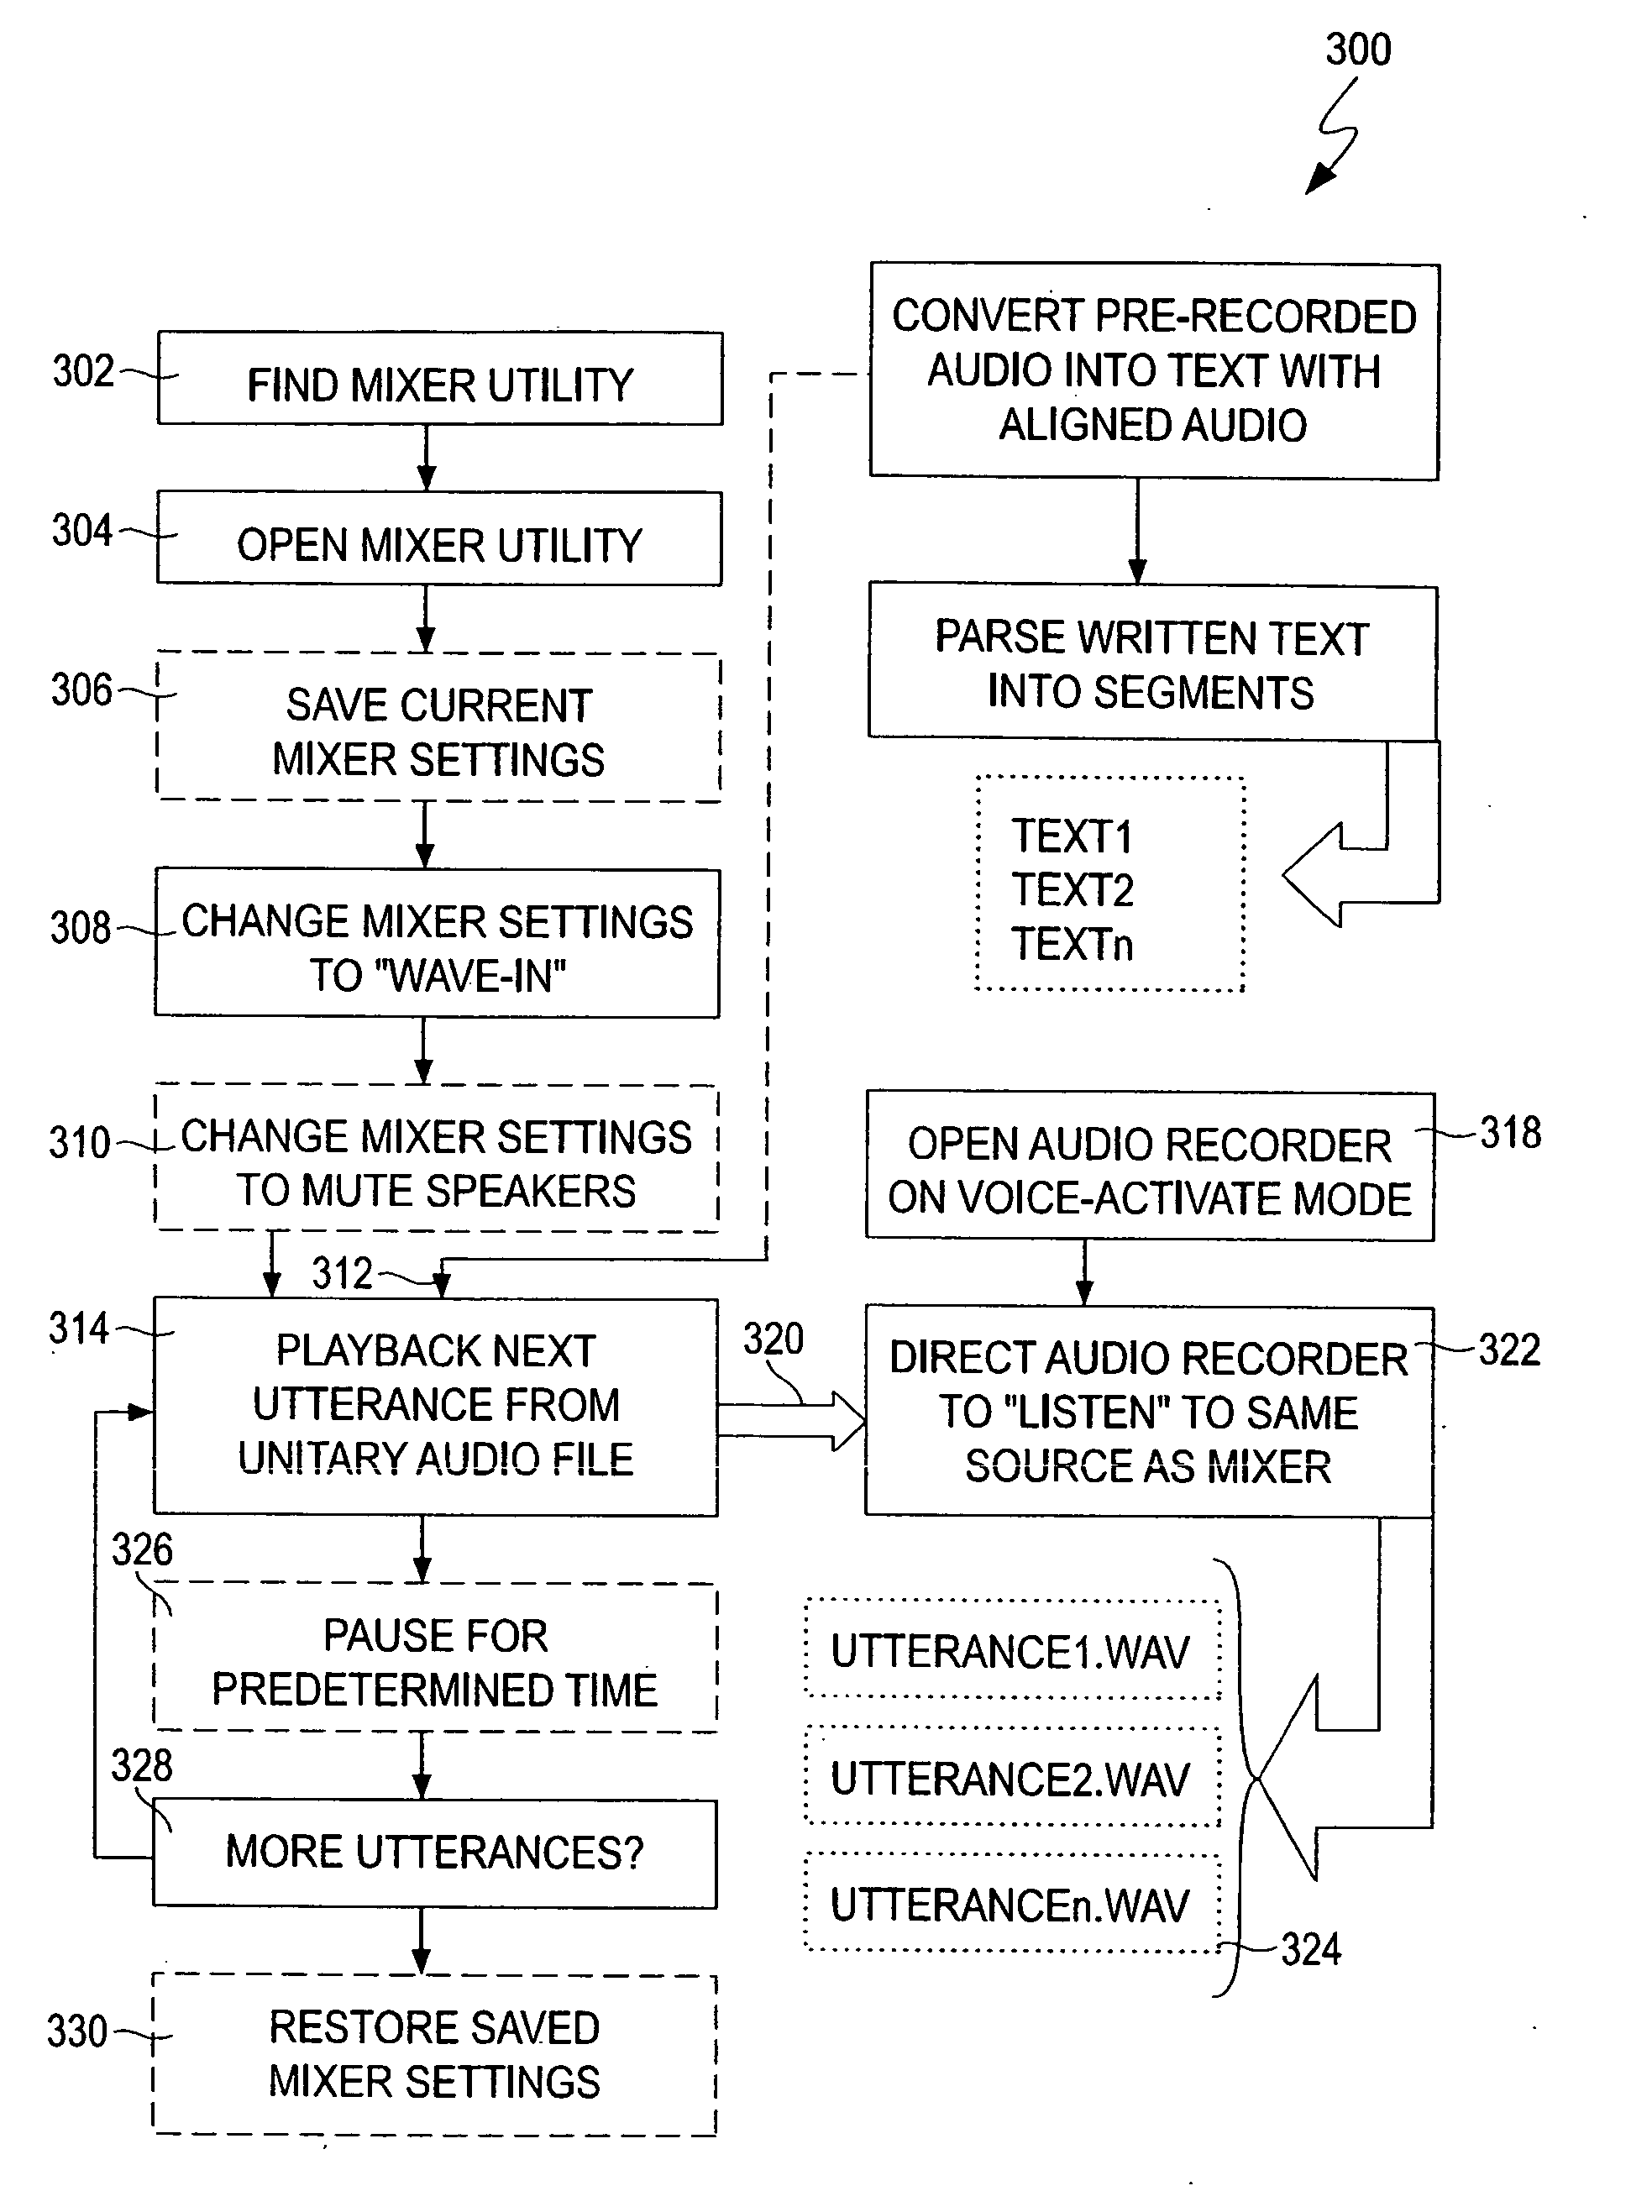 System for permanent alignment of text utterances to their associated audio utterances